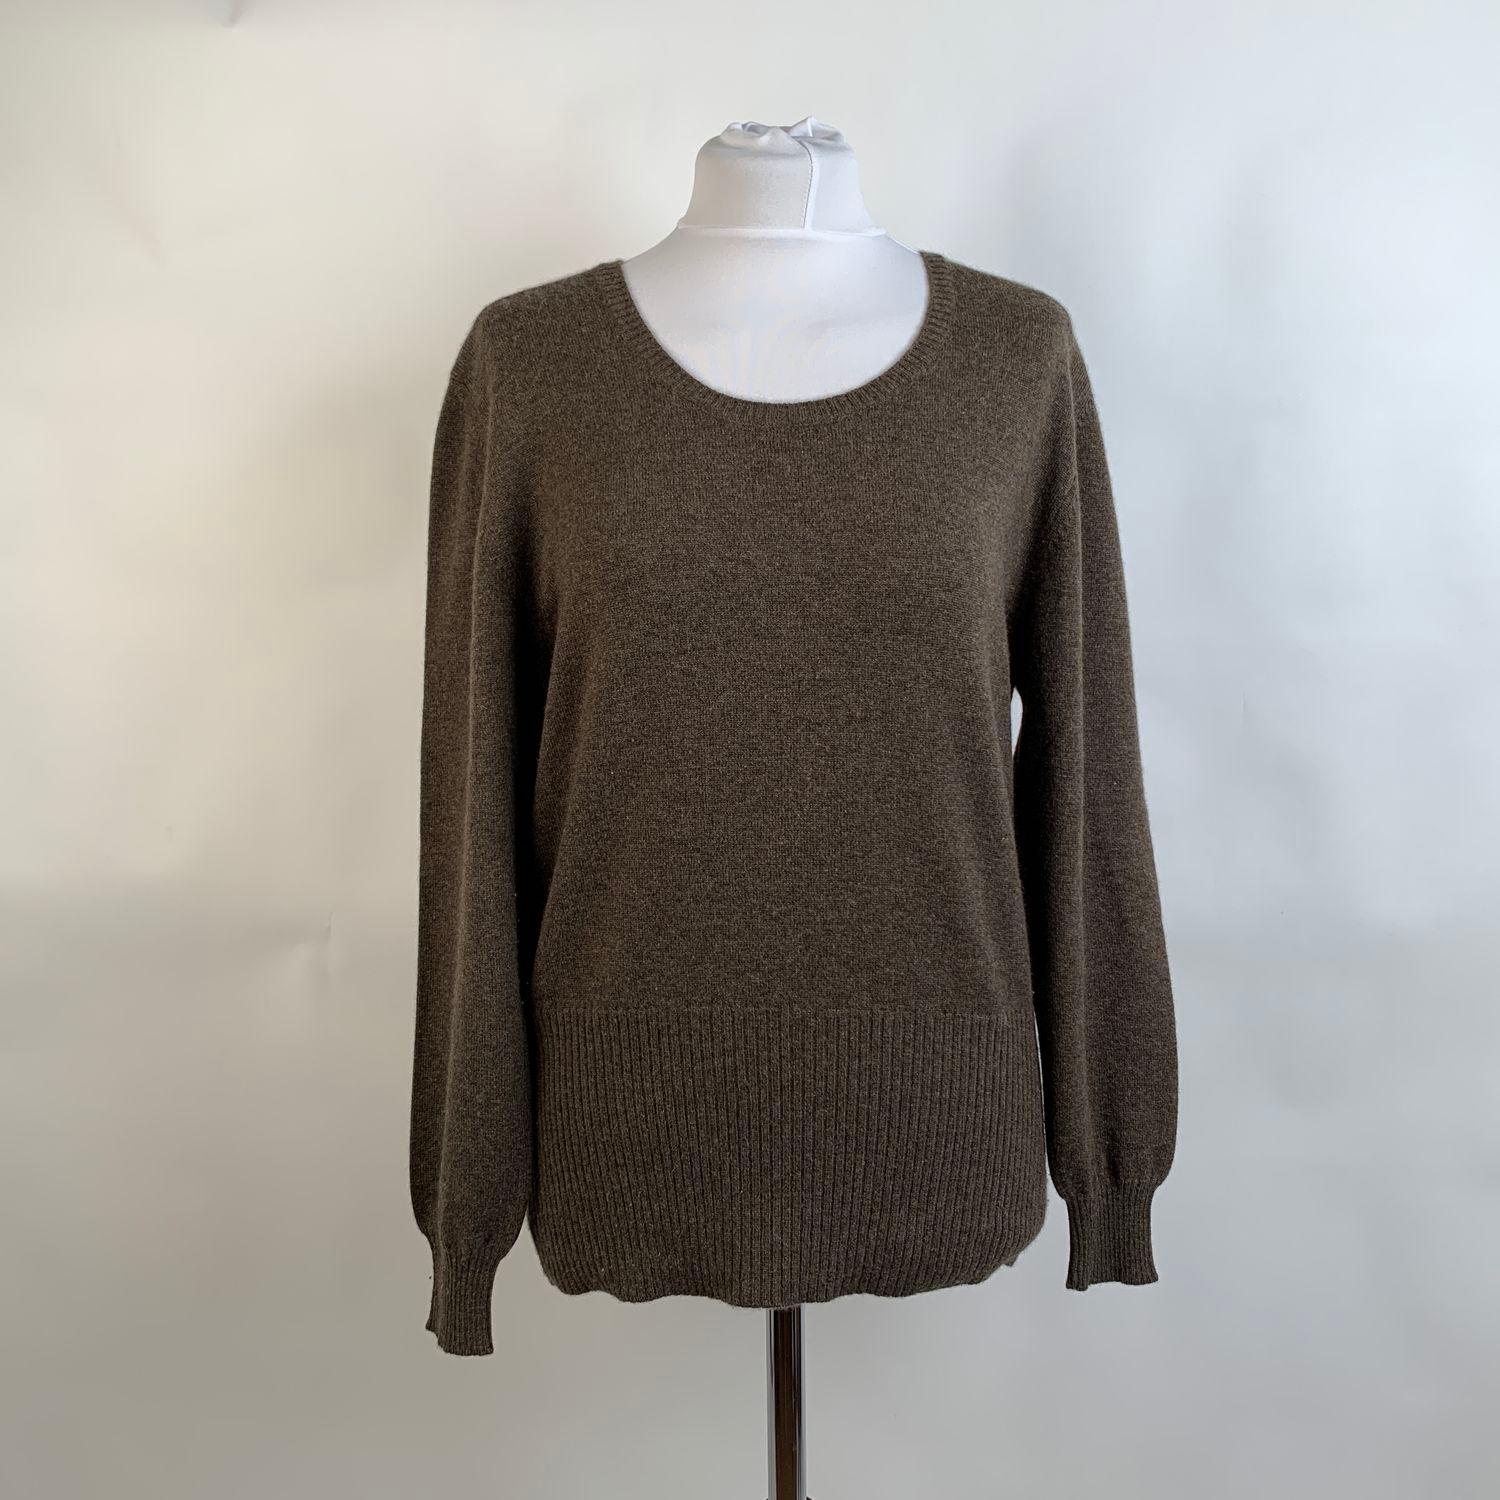 Malo brown cashmere jumper sweater. It features a round neckline and long sleeve styling. Composition: 100% Cashmere. Made in Italy. Size: 46 IT(The size shown for this item is the size indicated by the designer on the label). It should correspond